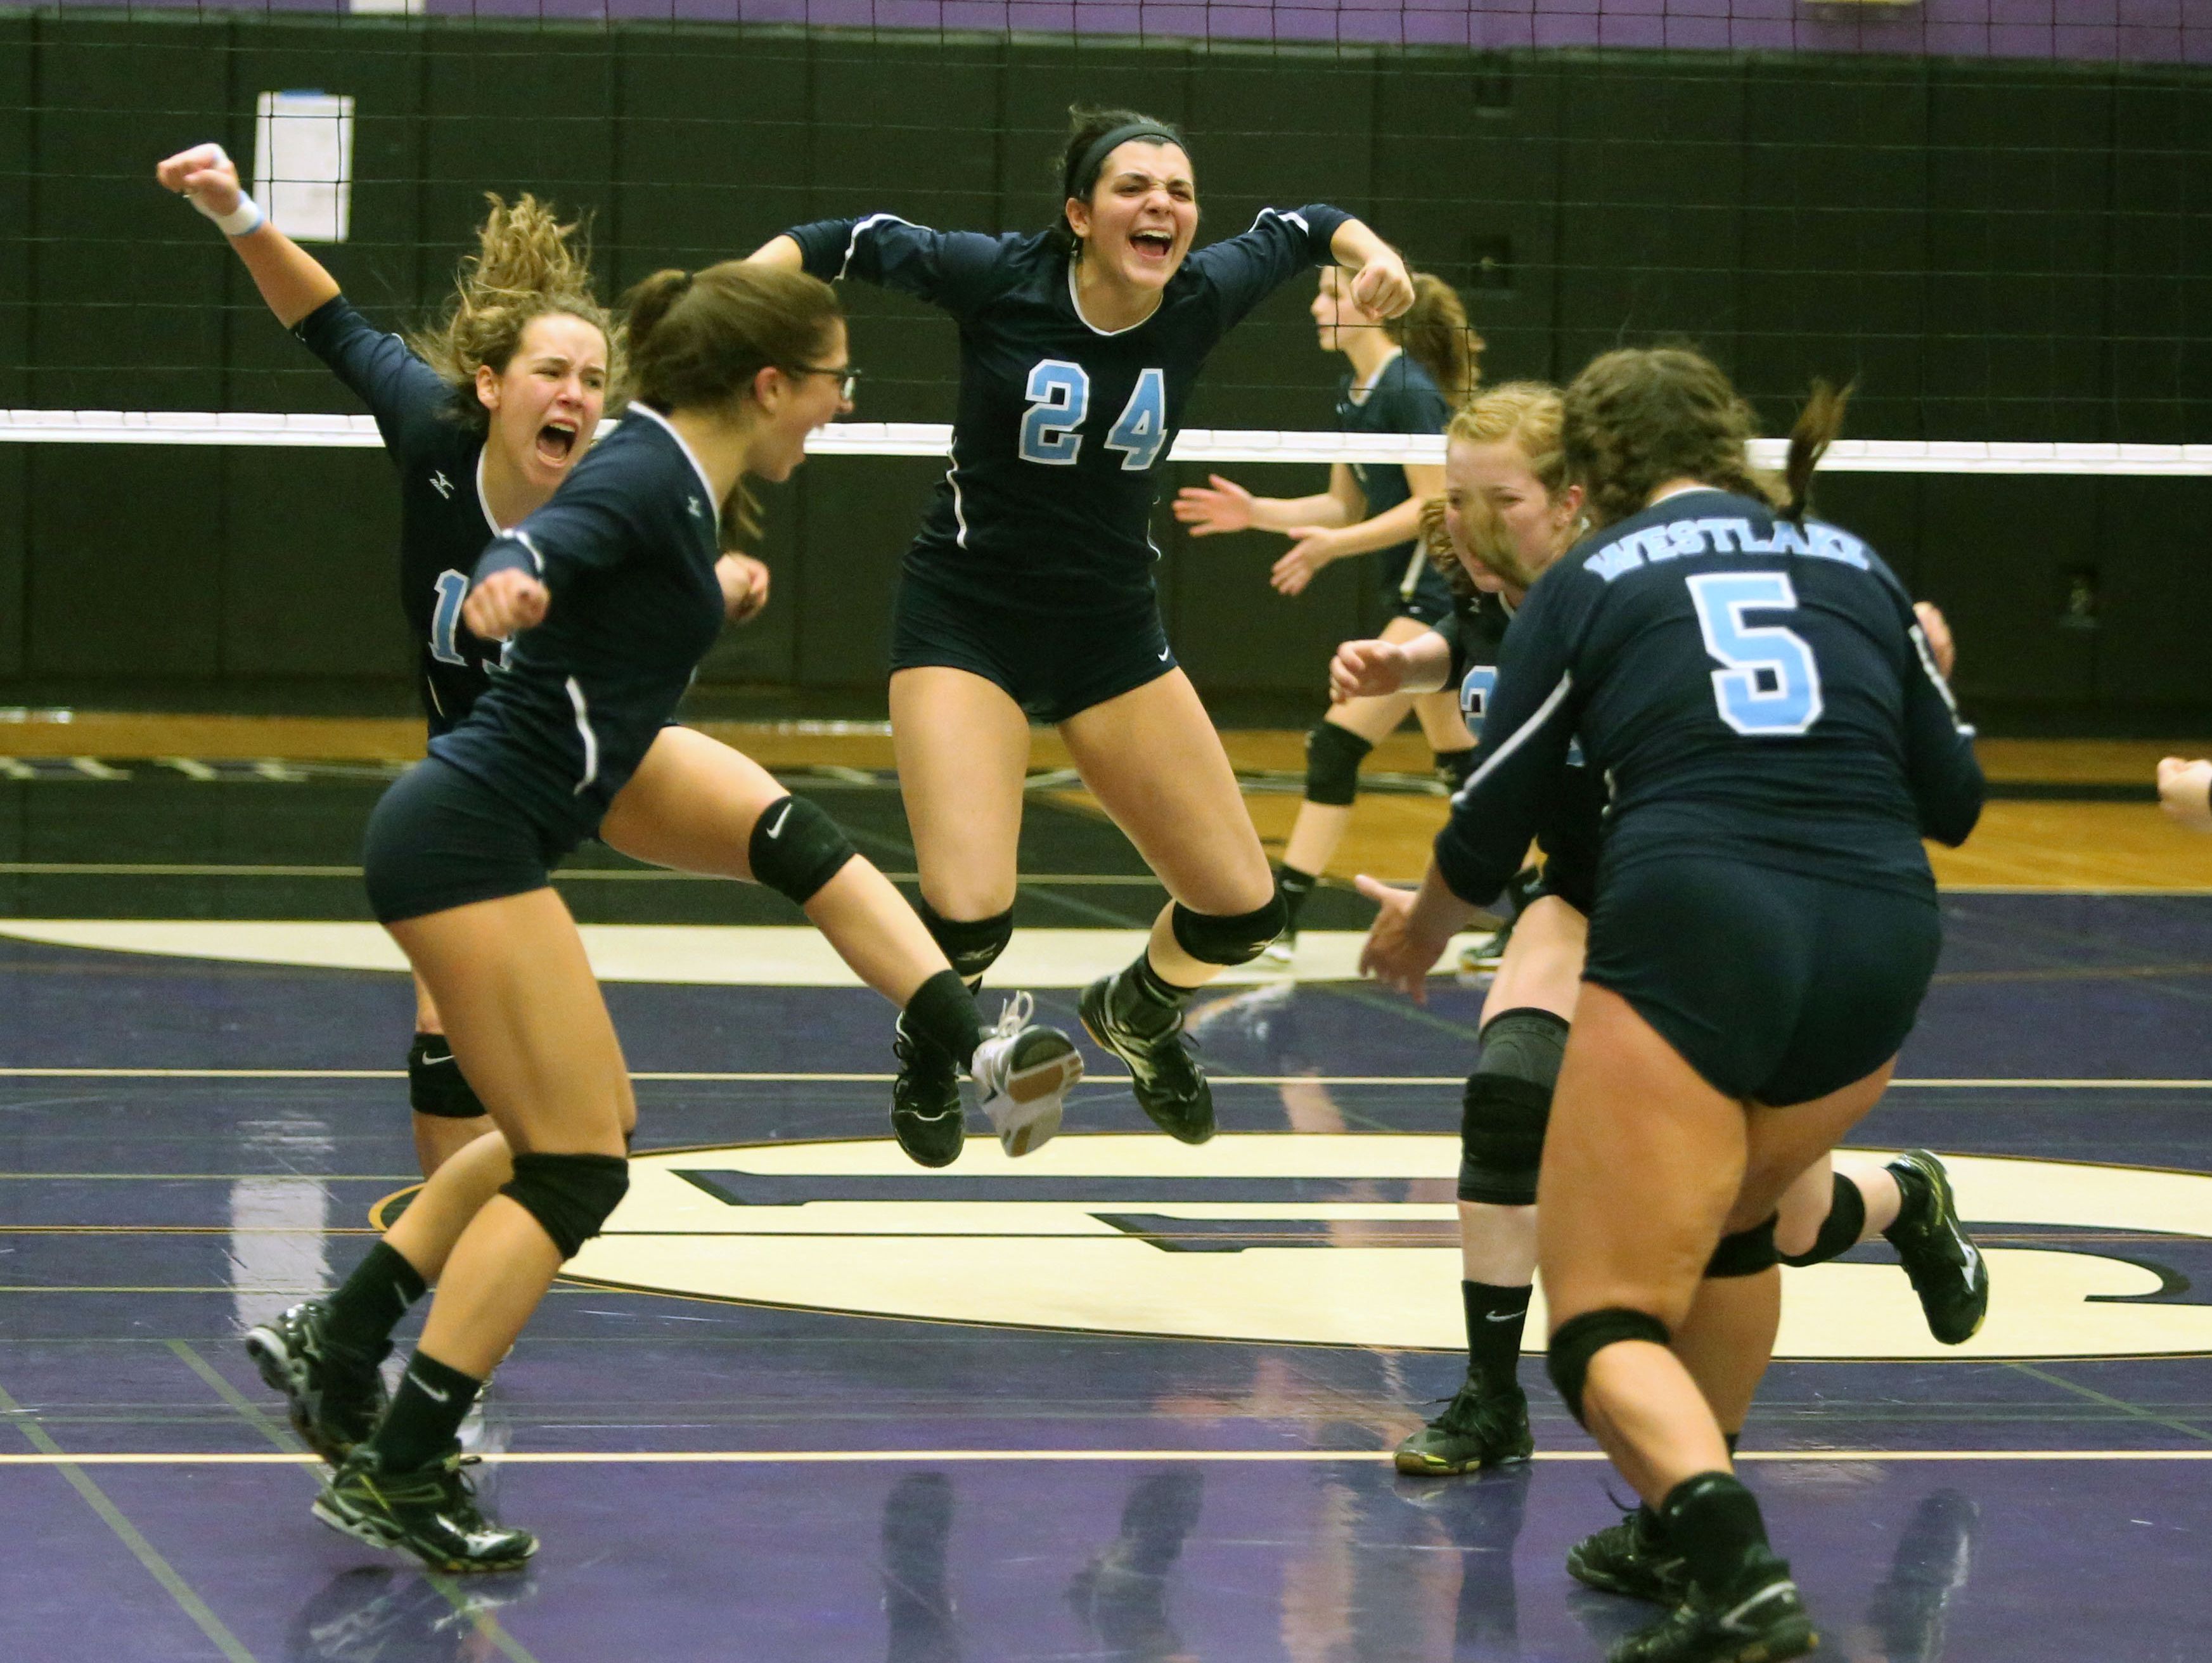 Westlake Captain Kelly Martin celebrates a point near the end of their match against Lourdes during the Section 1 Class B volleyball final at John Jay High School in Cross River, Nov. 5, 2016. Westlake beat Lourdes 3 games to 2.